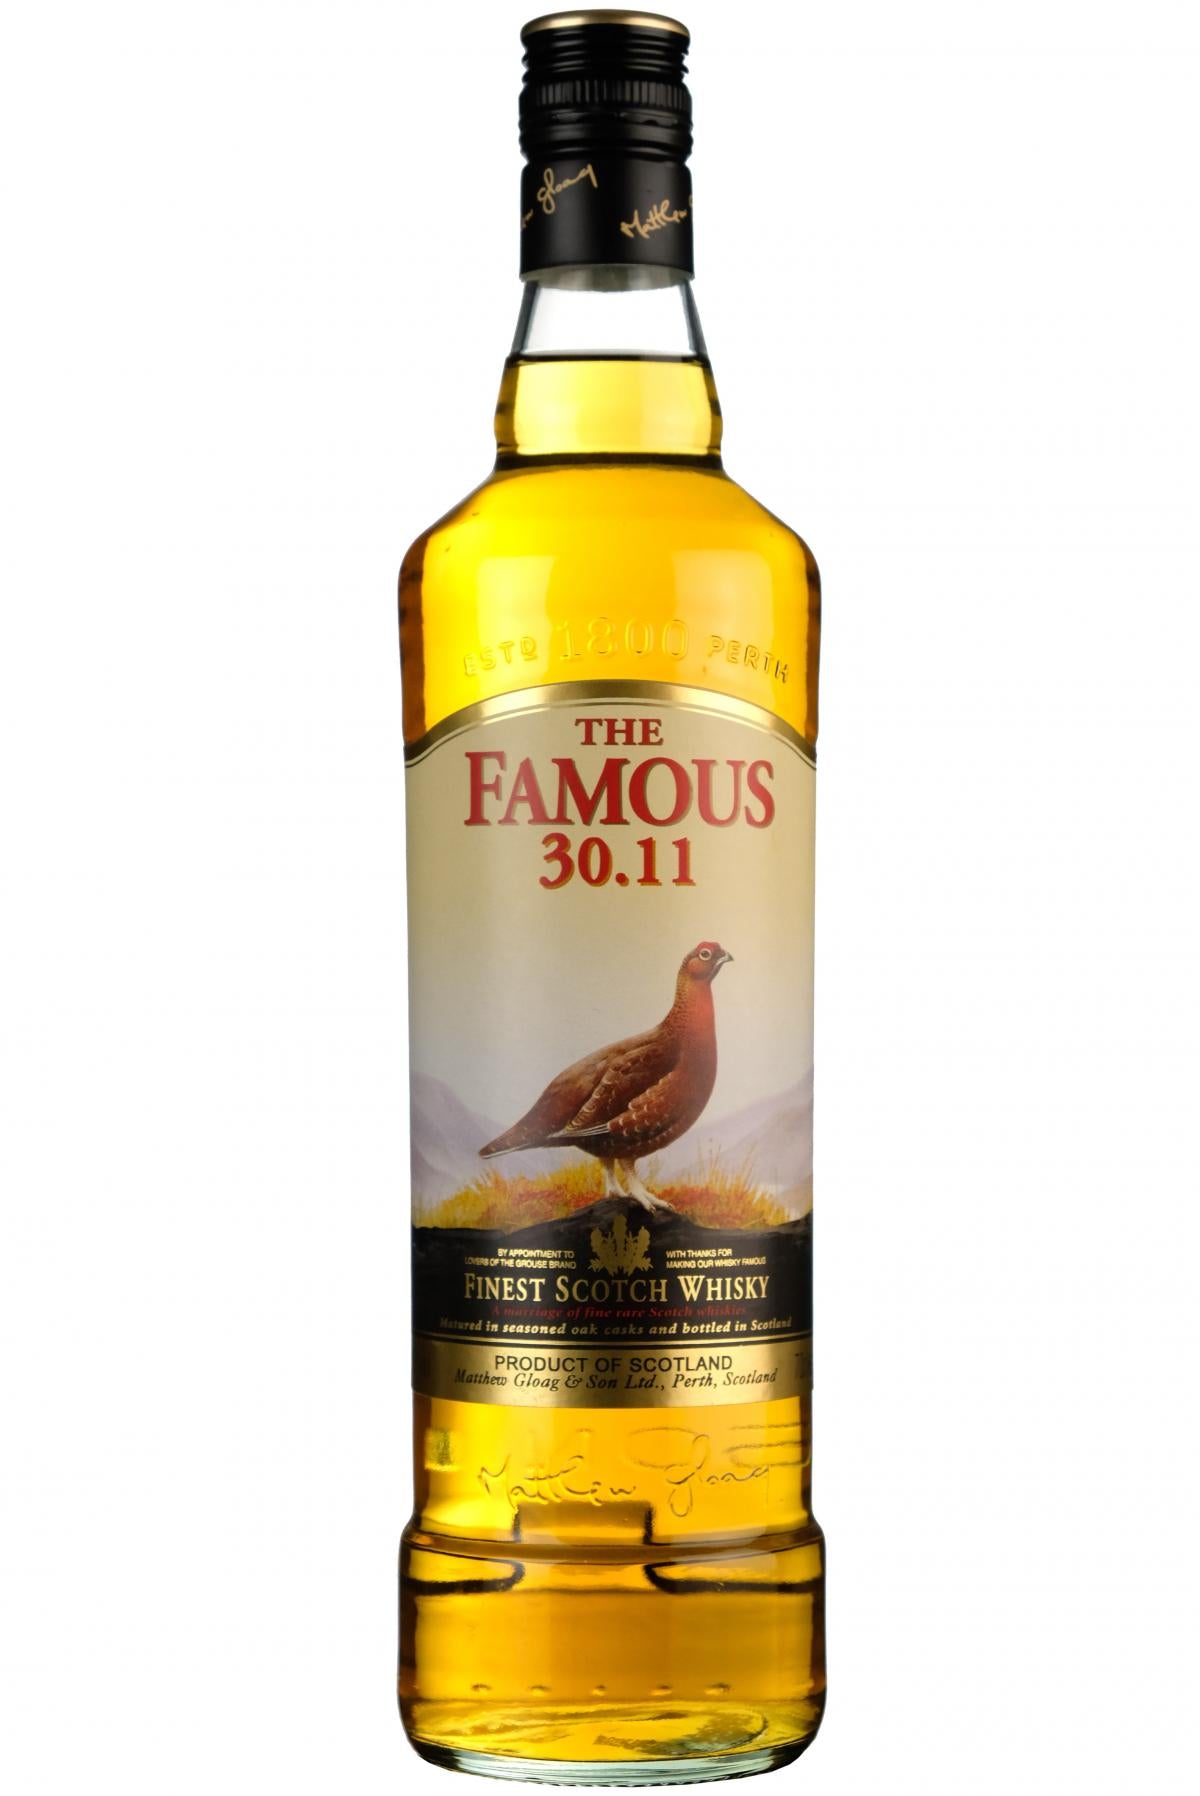 The Famous Grouse 30.11